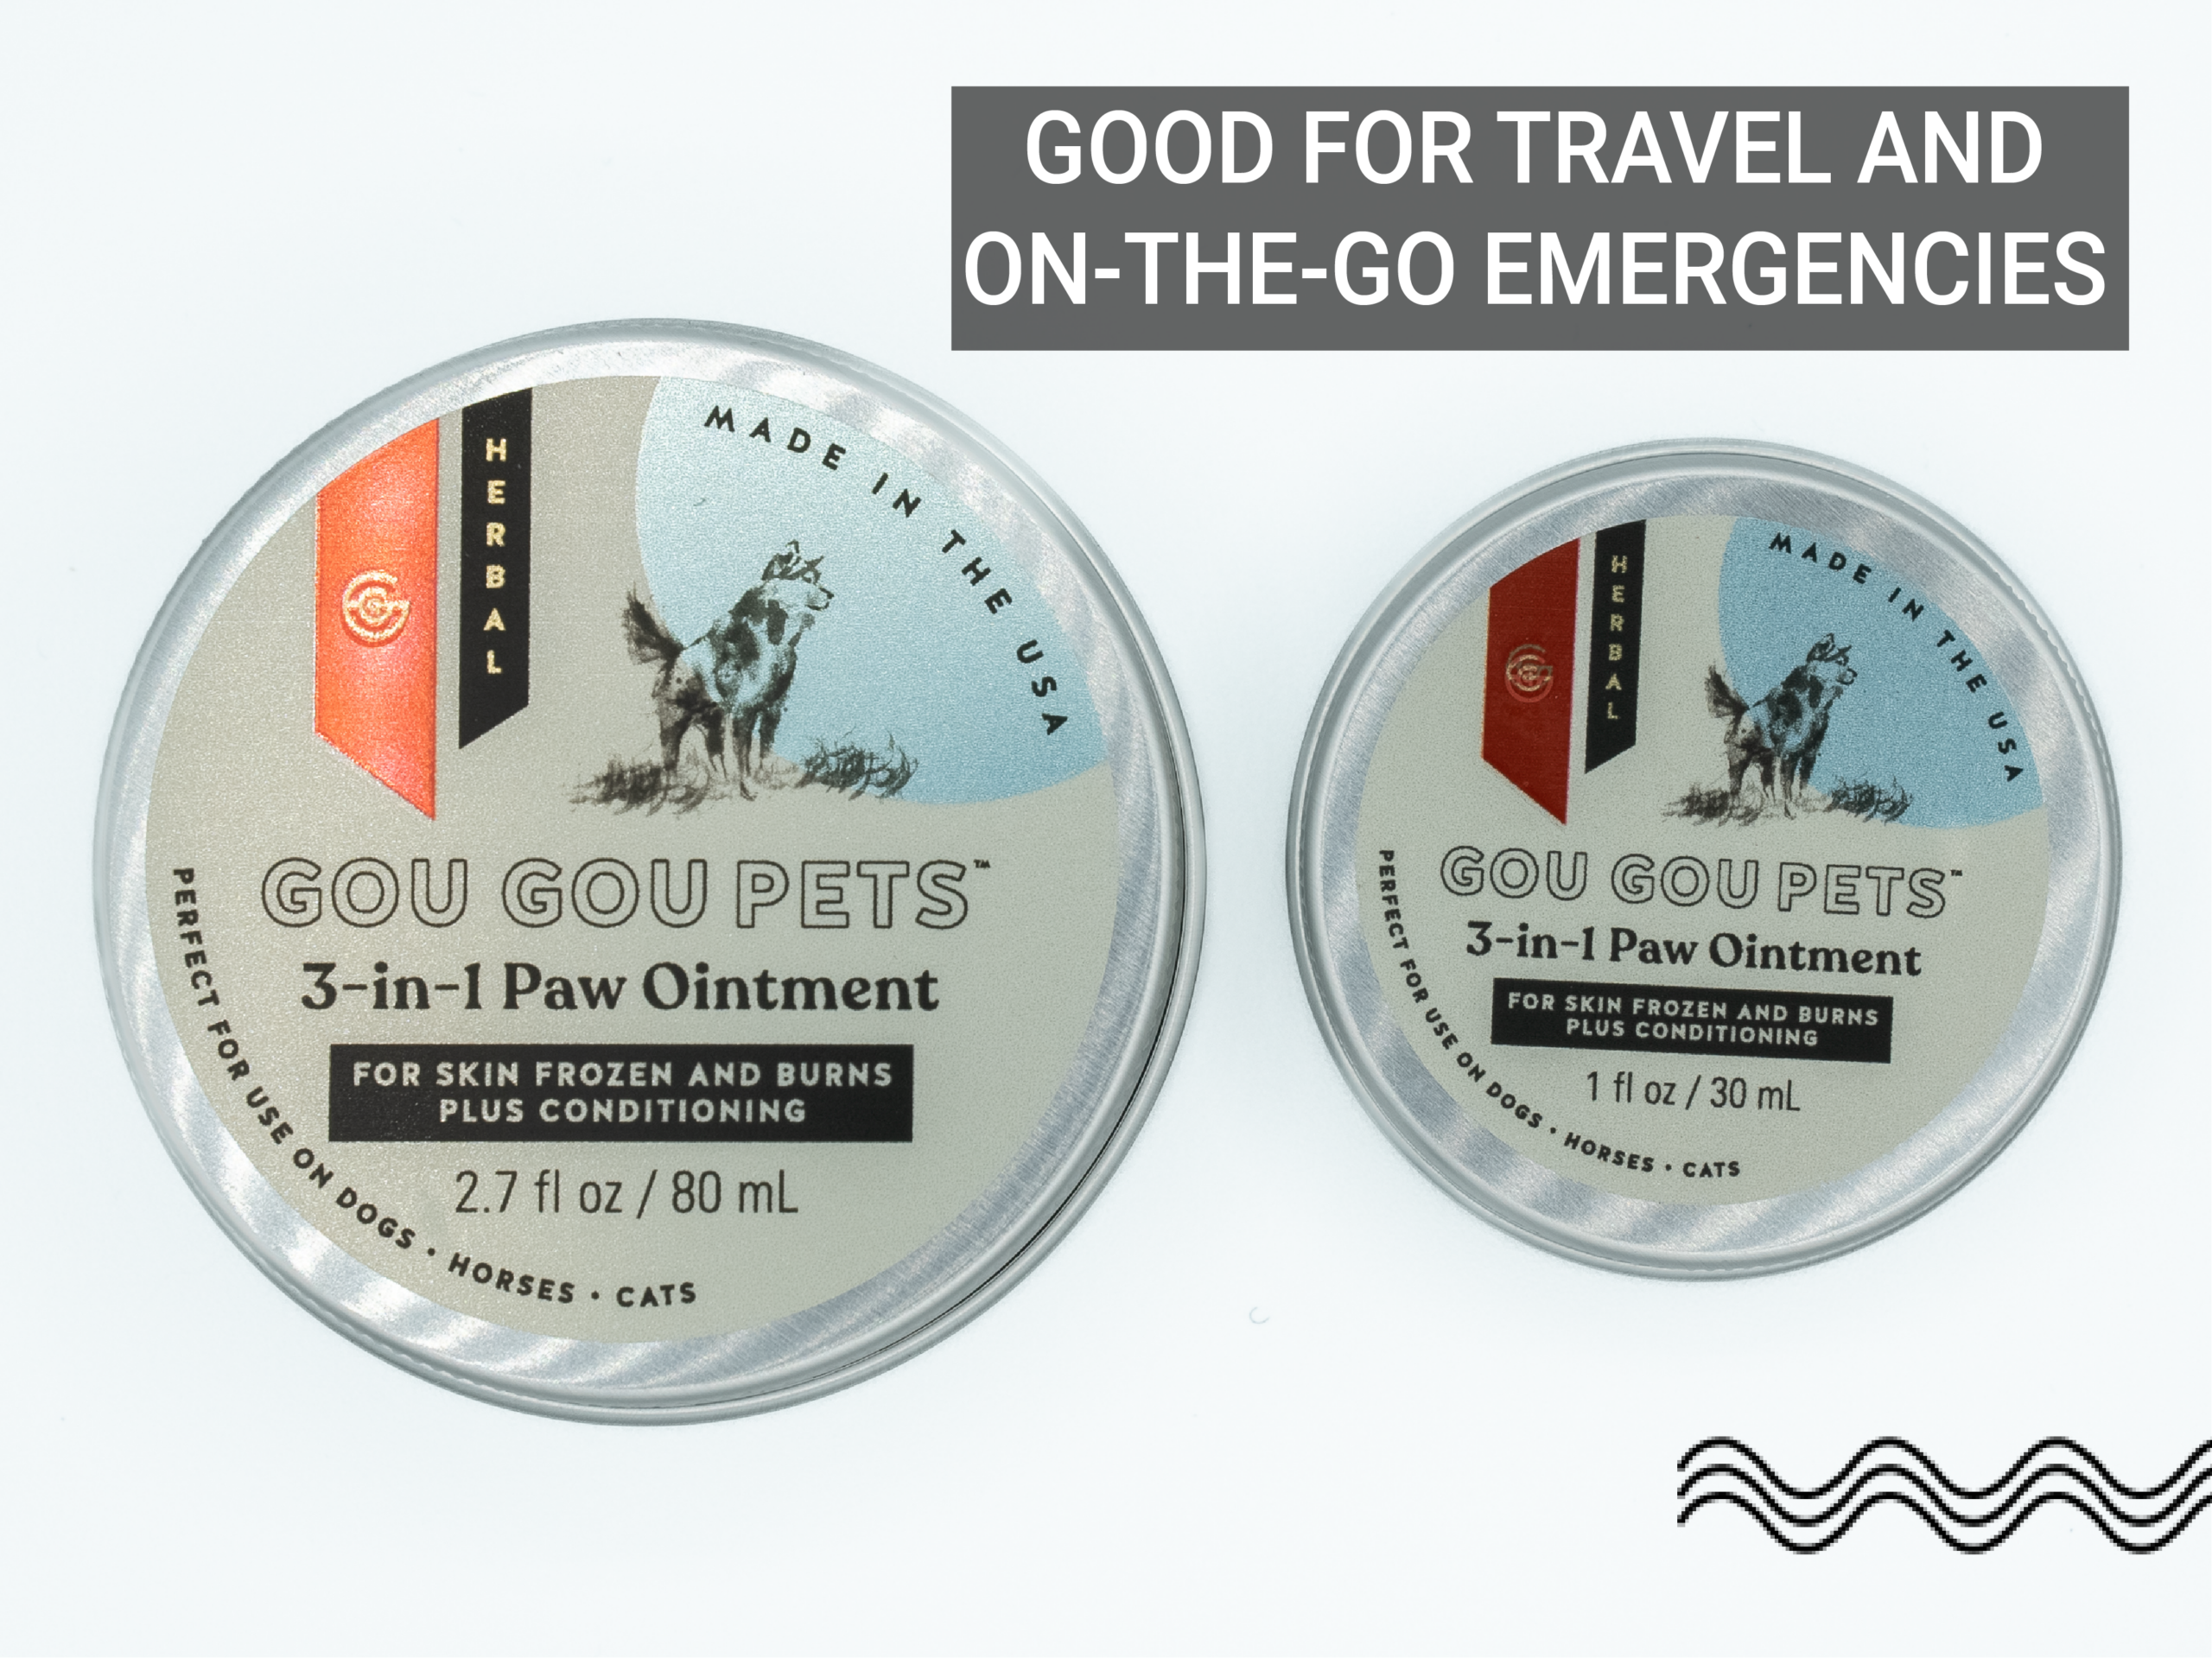 Gou Gou Pets 3-in-1 Paw Ointment for Dogs and Cats: Conditioning & Moisturizing for Extreme Heat & Cold Causing Frozen & Burned Paws